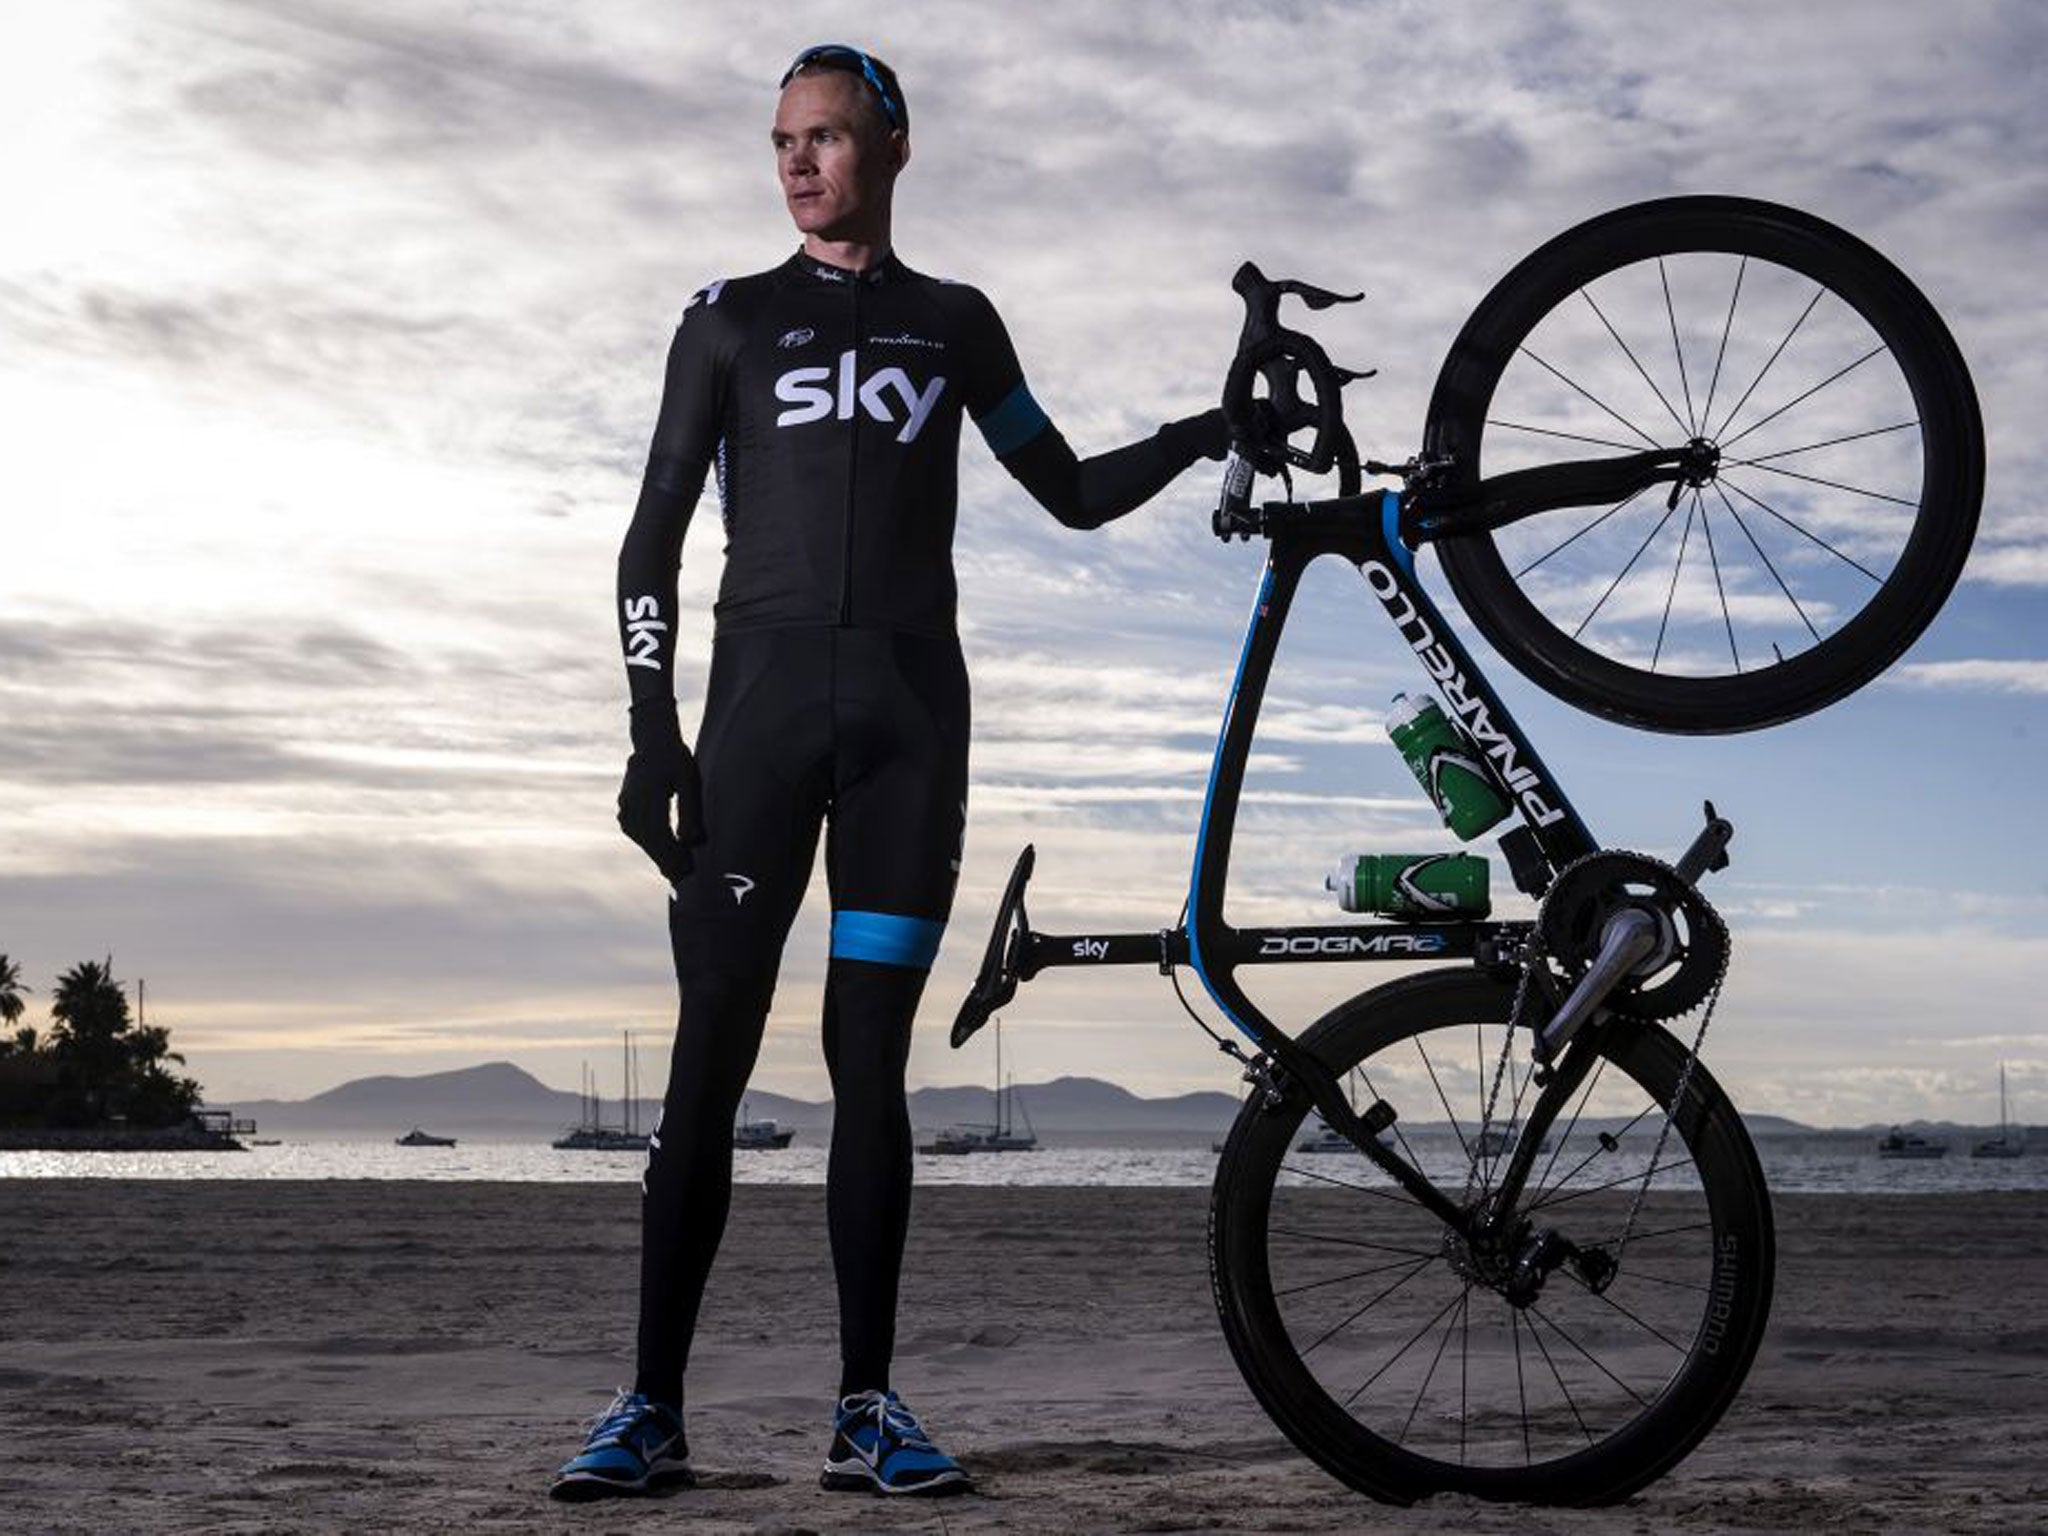 Chris Froome poses with his bike on a Spanish beach ahead of the serious action, which starts next week